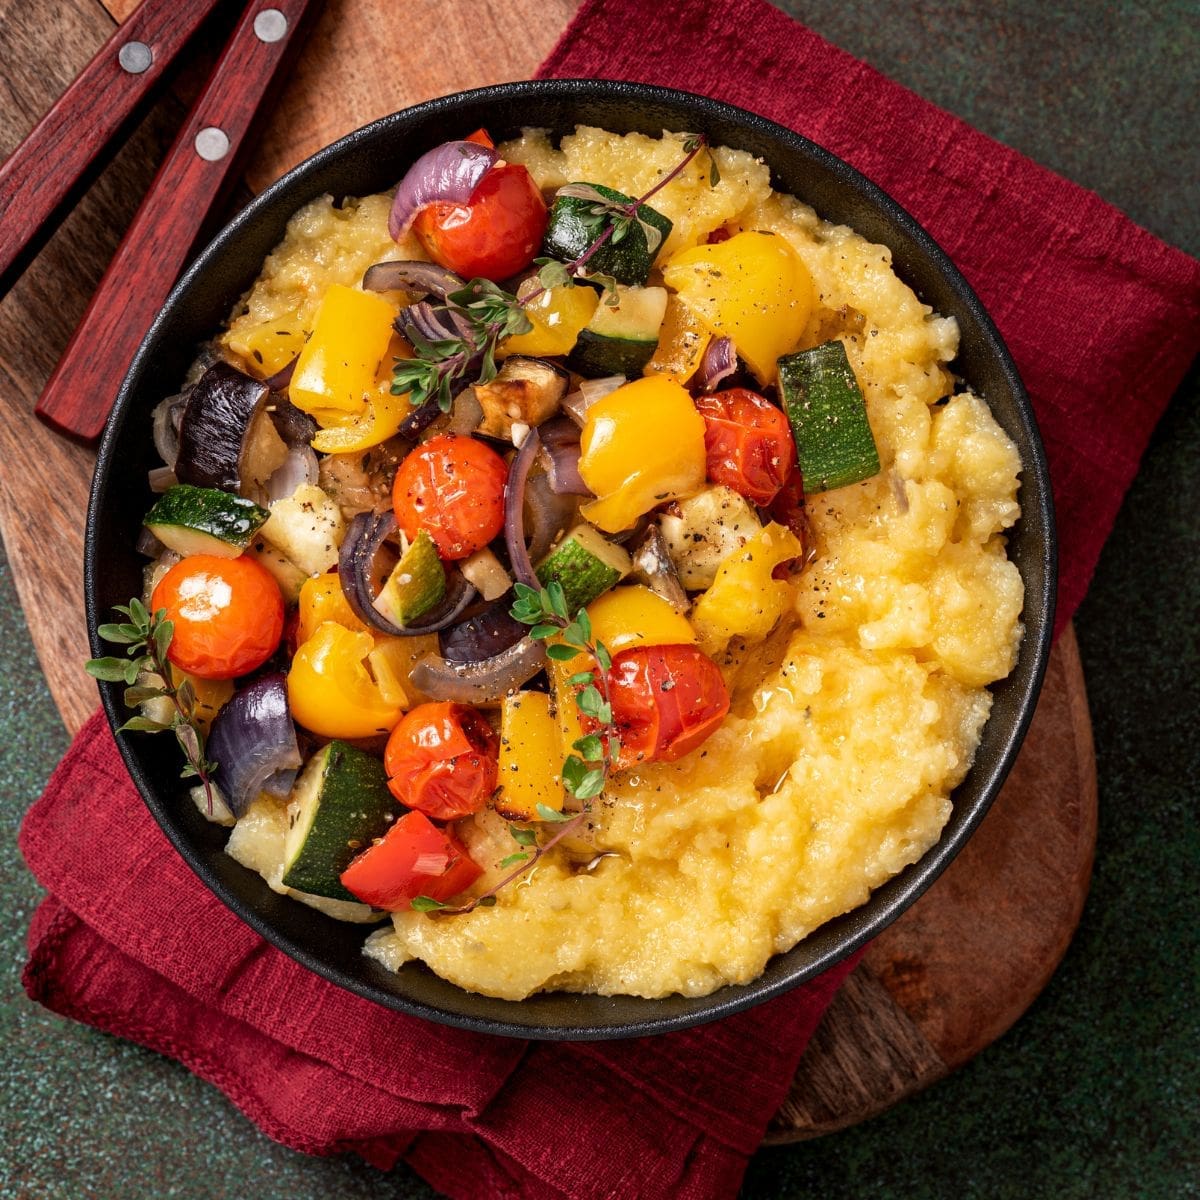 What To Serve With Polenta: 25 BEST Savory Side Dishes🍴